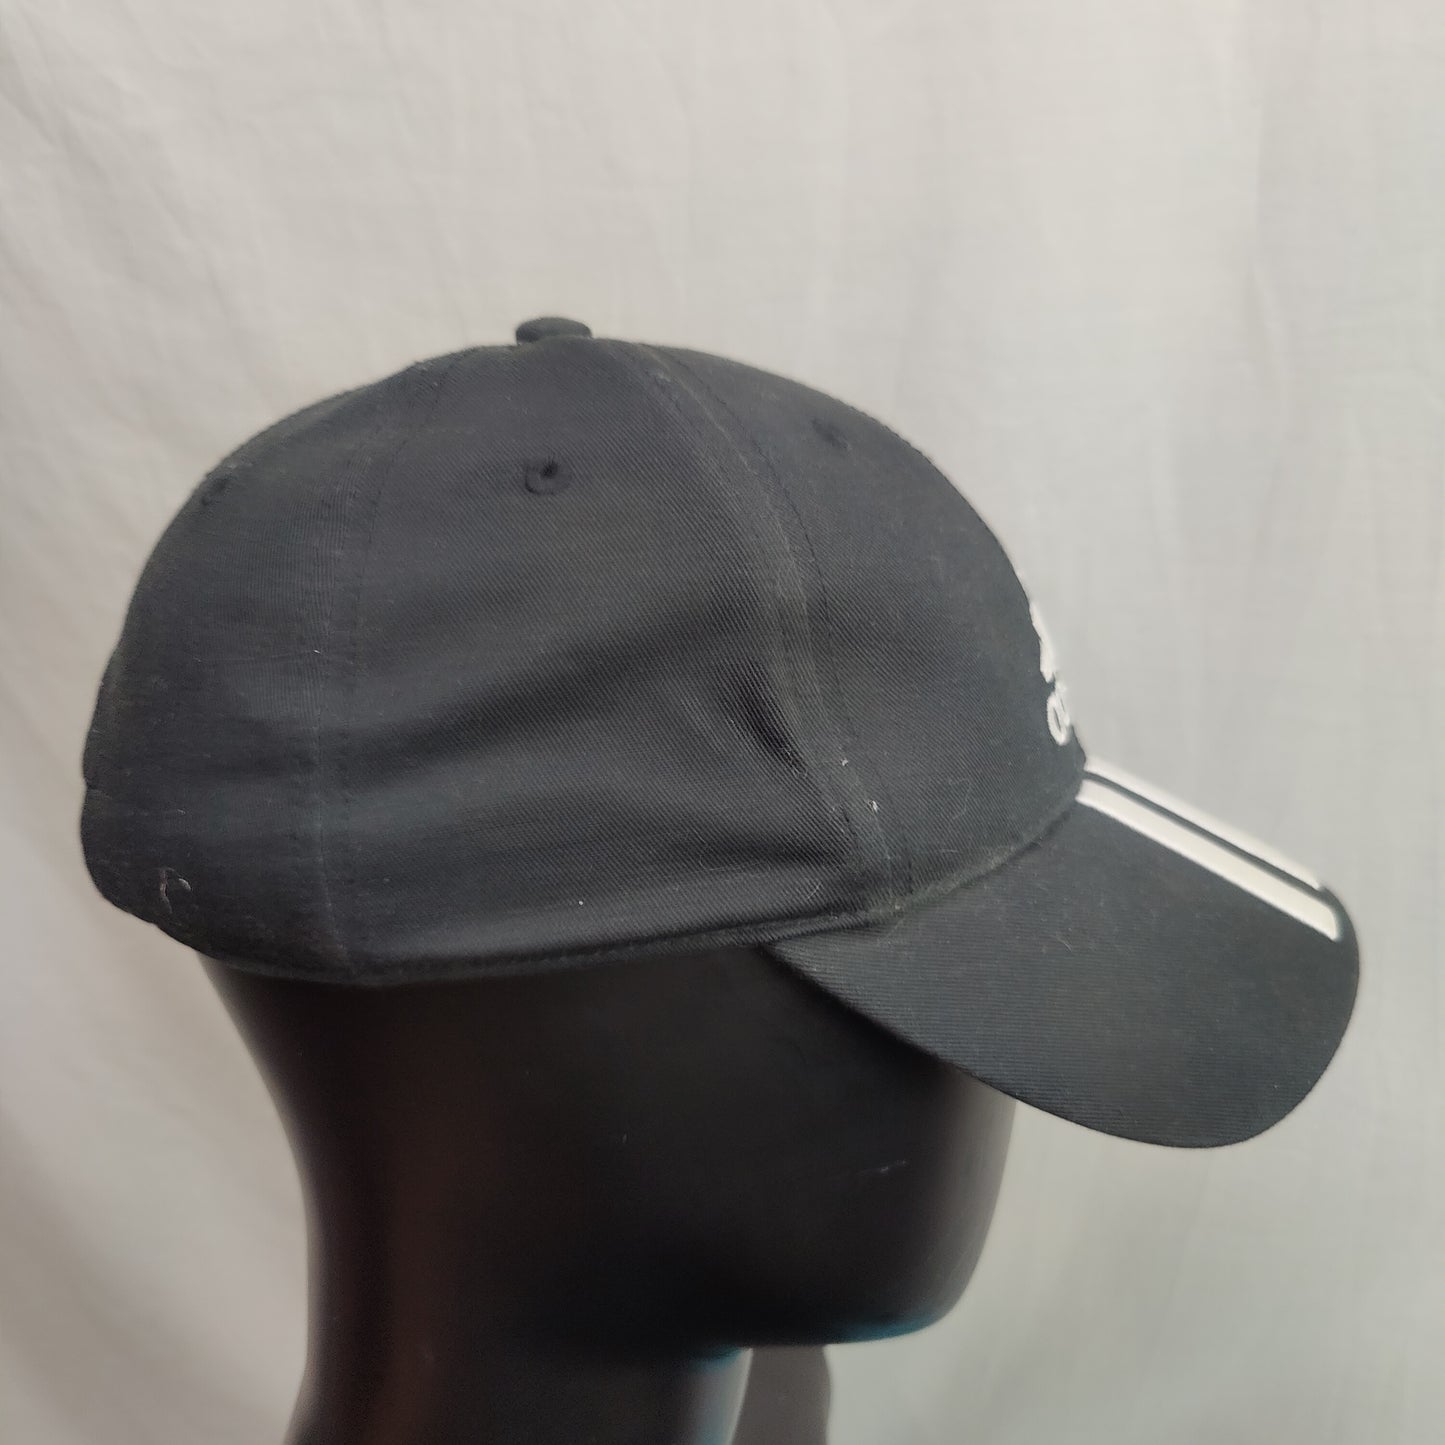 Adidas Black Embroidered Baseball Cap Hat Men One Size